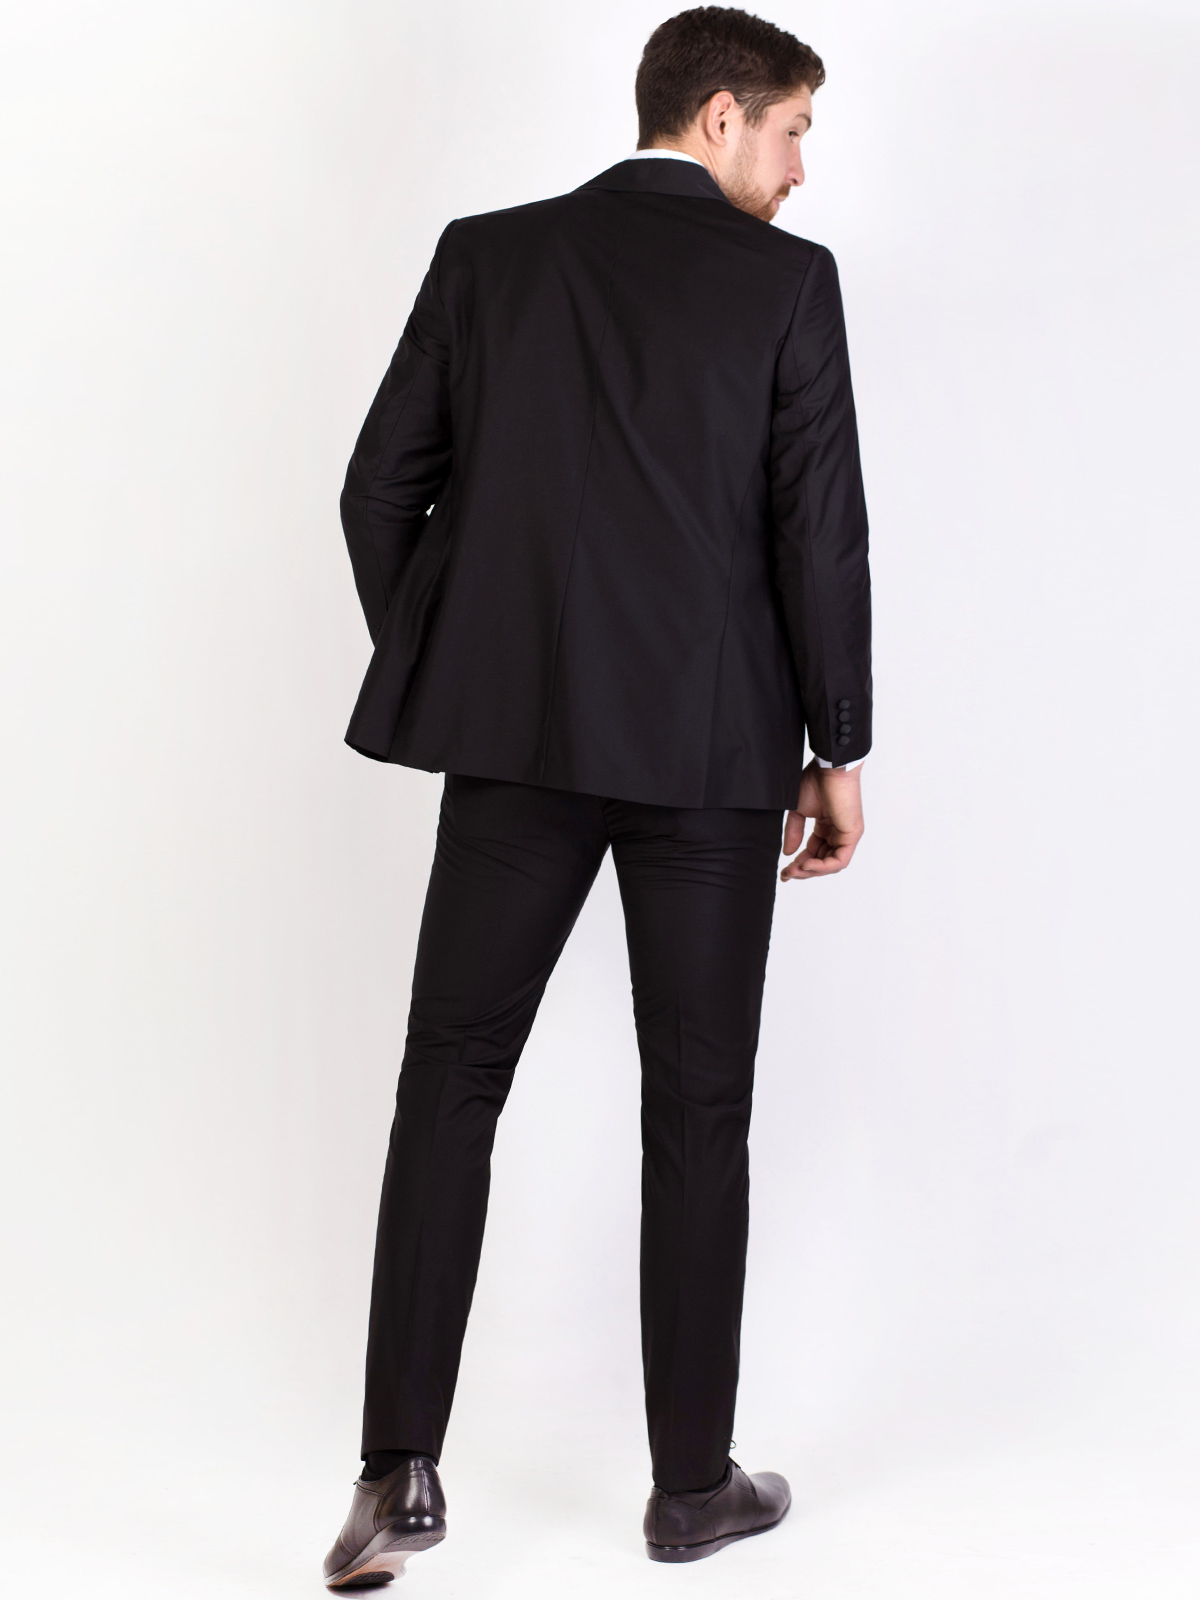  stylish classic trousers in black  - 63301 € 52.90 img4